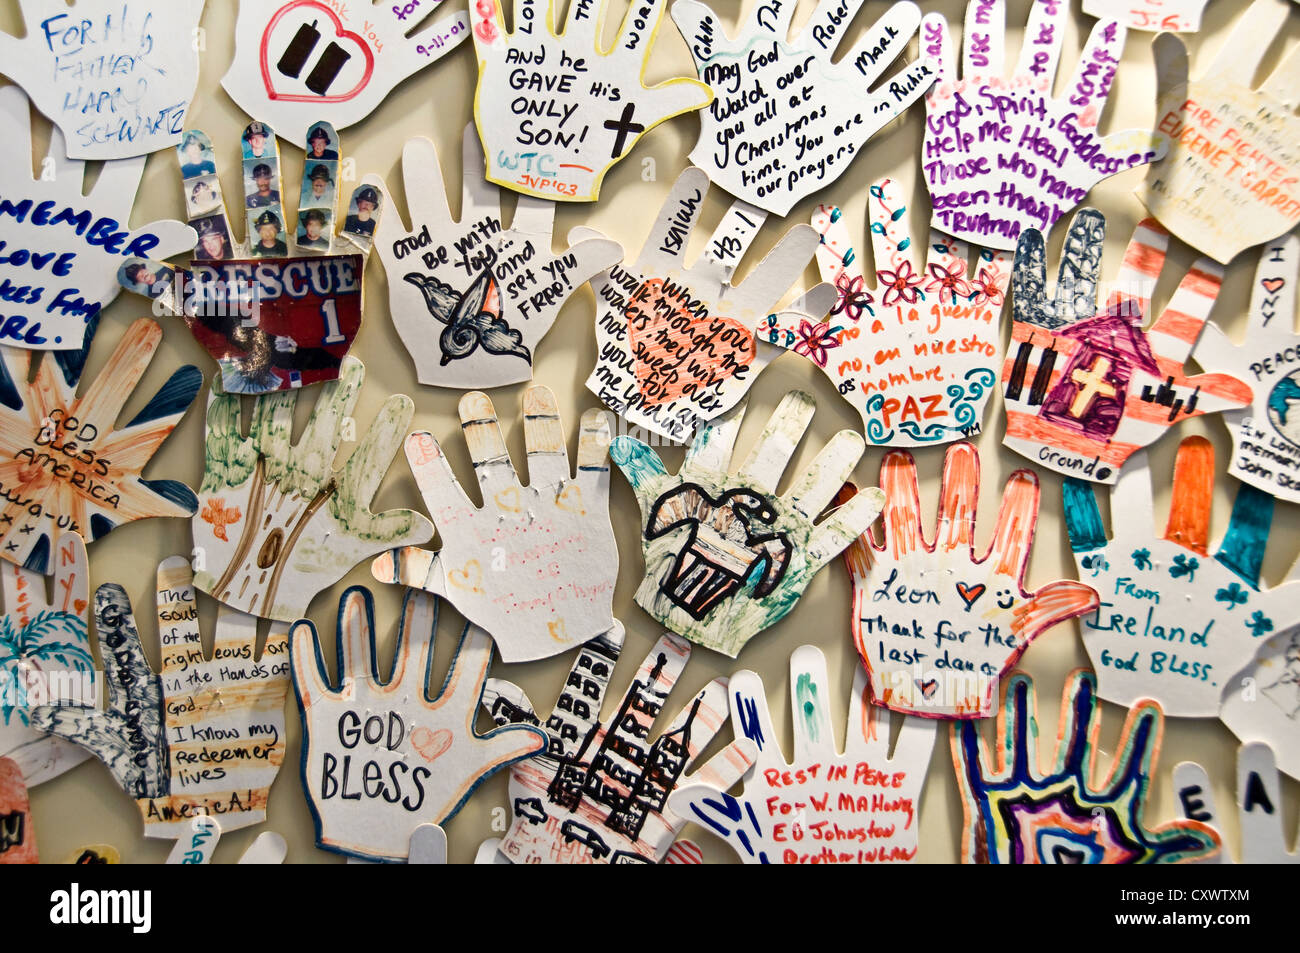 Papercut hands in memory of the victims of 9/11 - Saint Paul's chapel - New York City, USA Stock Photo